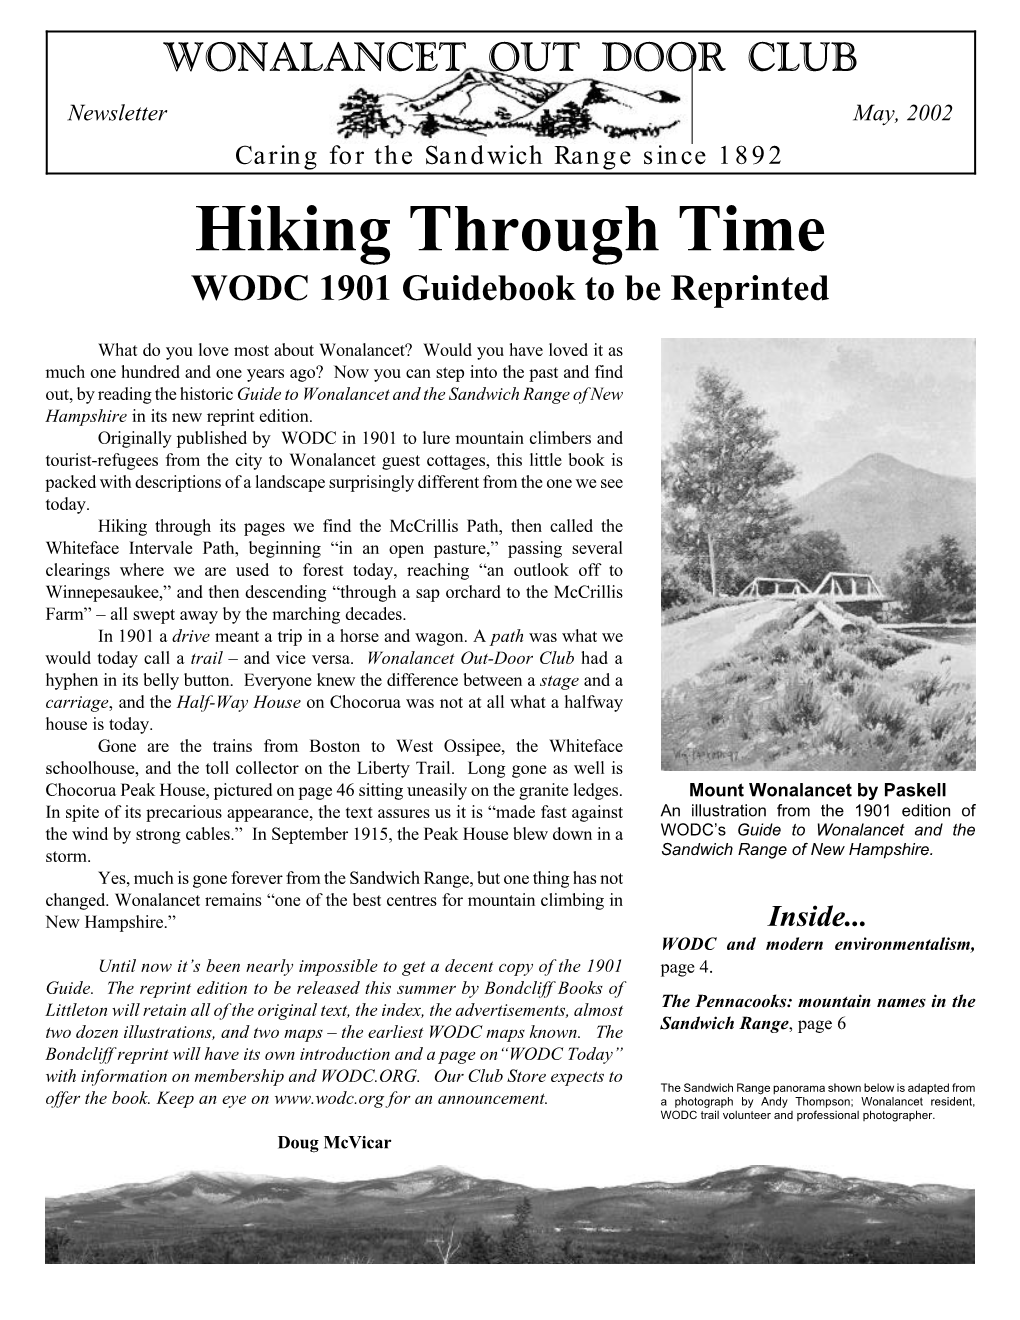 Hiking Through Time WODC 1901 Guidebook to Be Reprinted